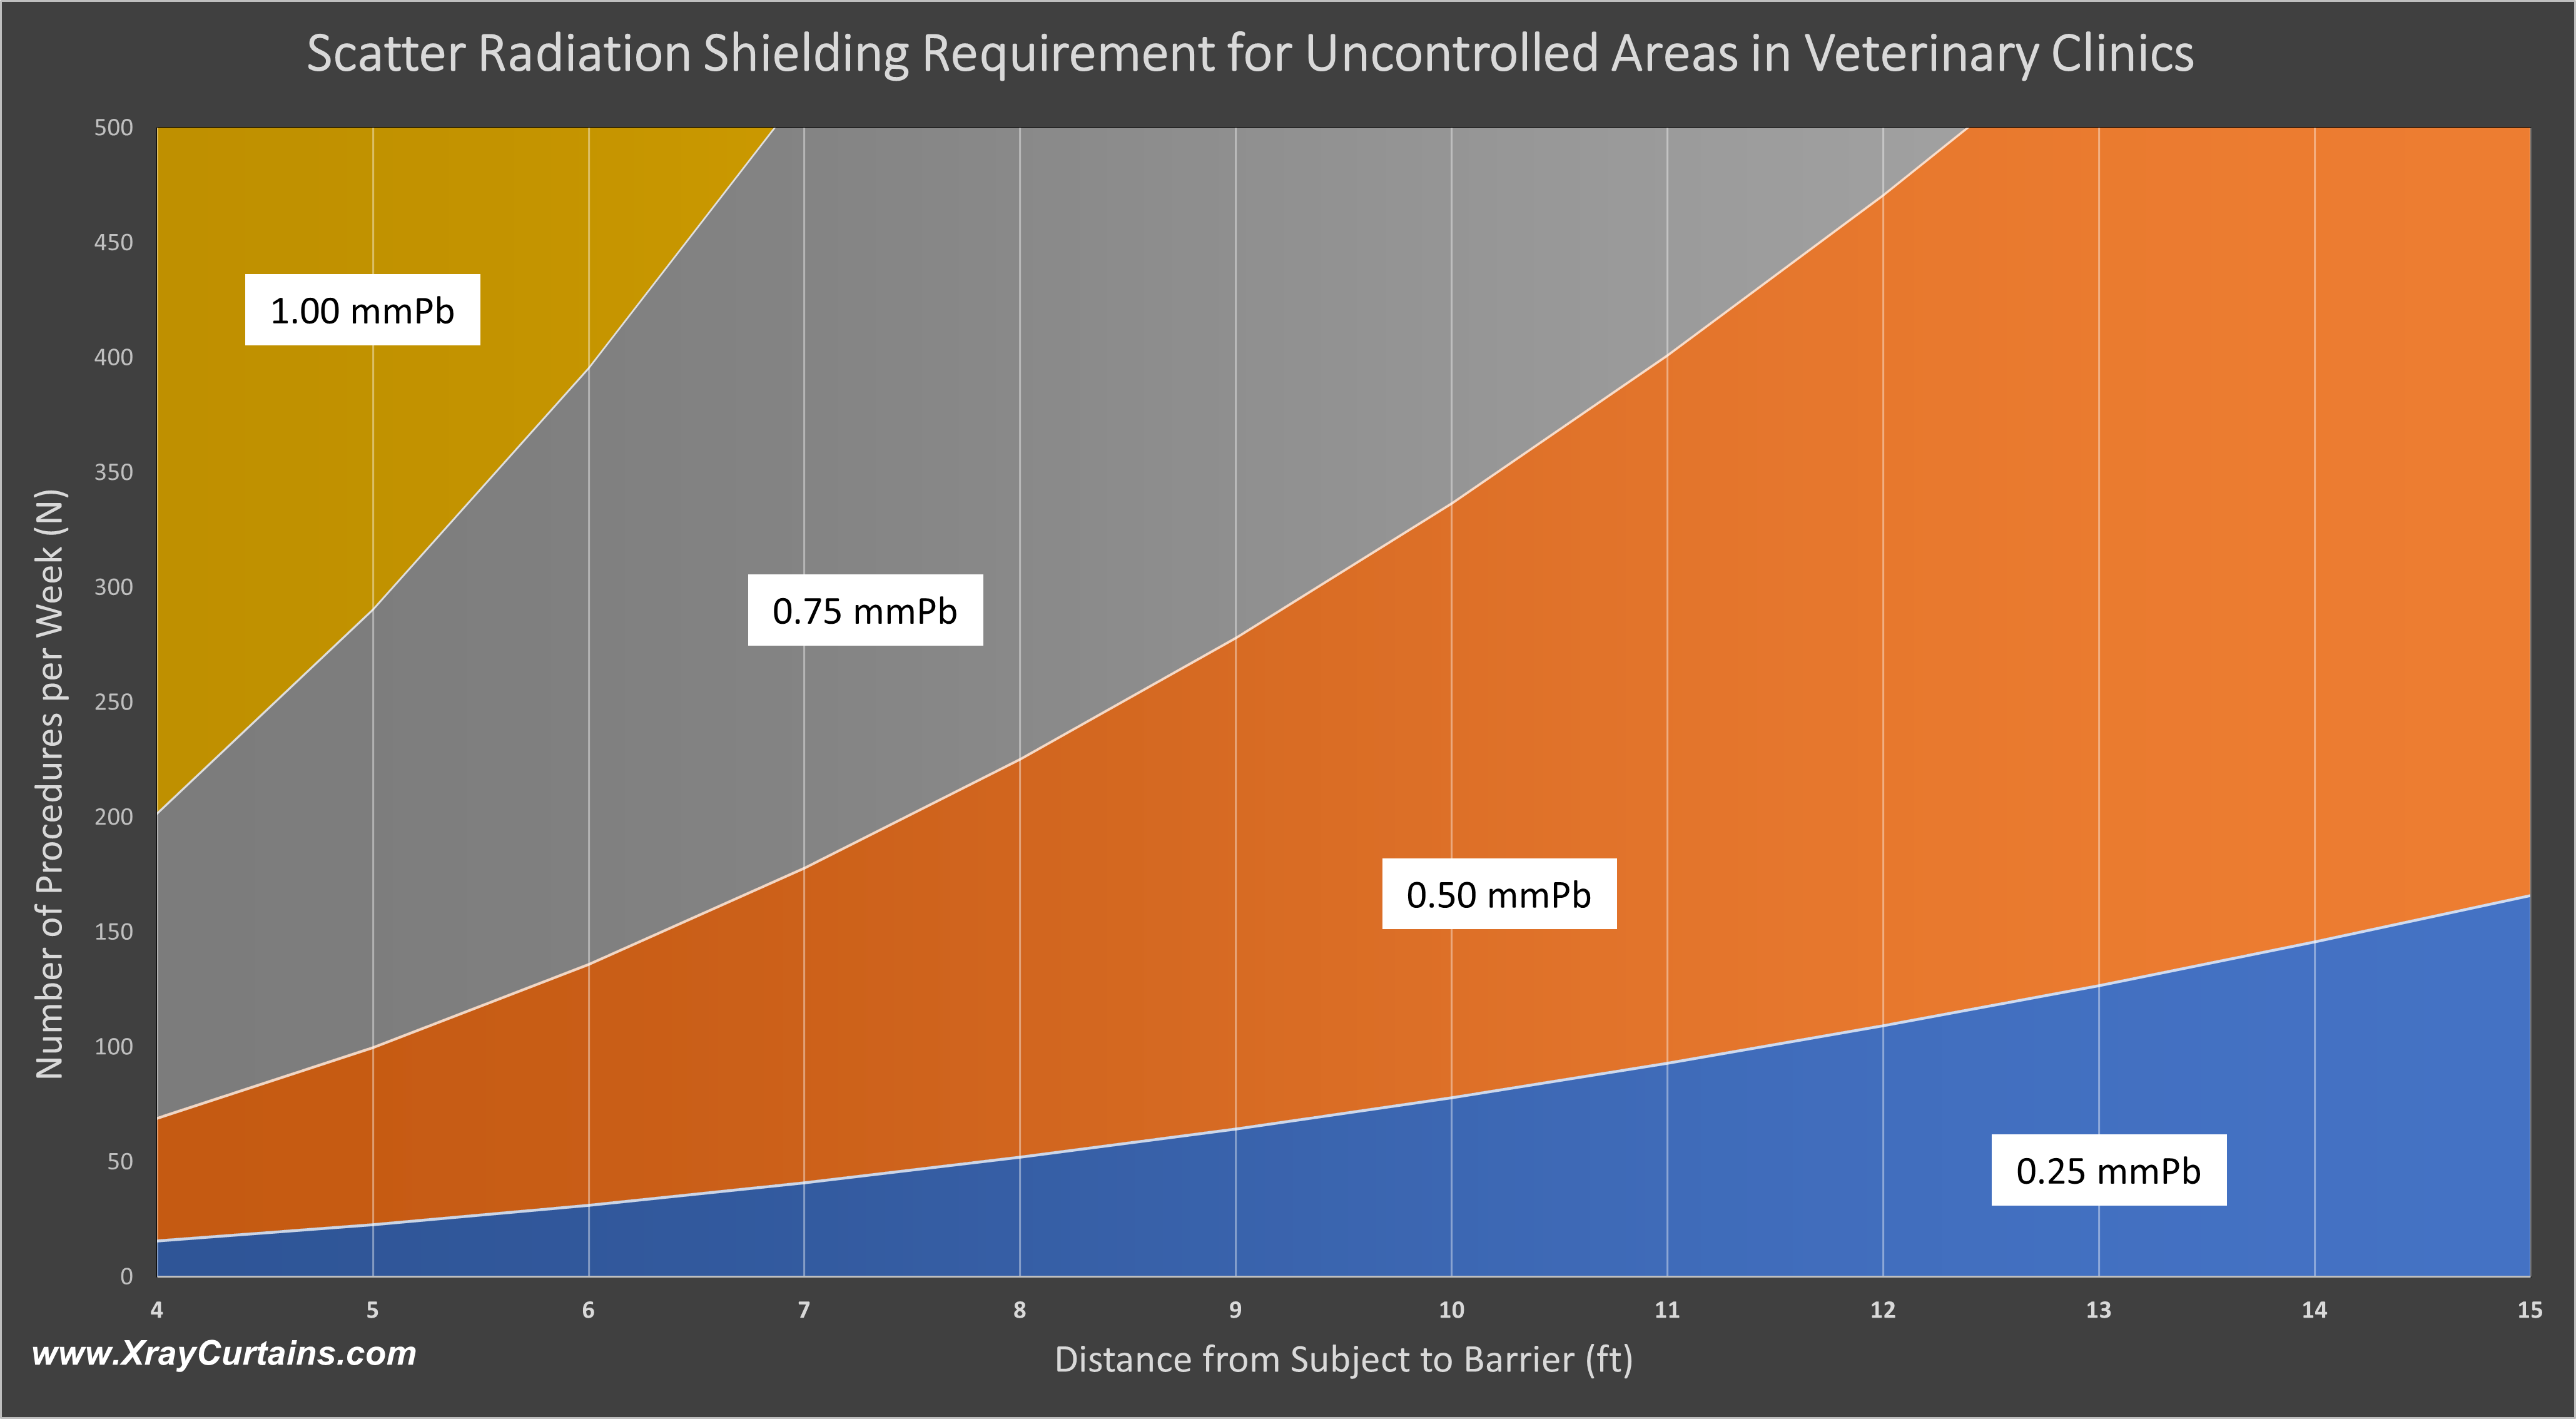 Scatter Radiation Shielding Requirement for Controlled Areas in Veterinary Clinics